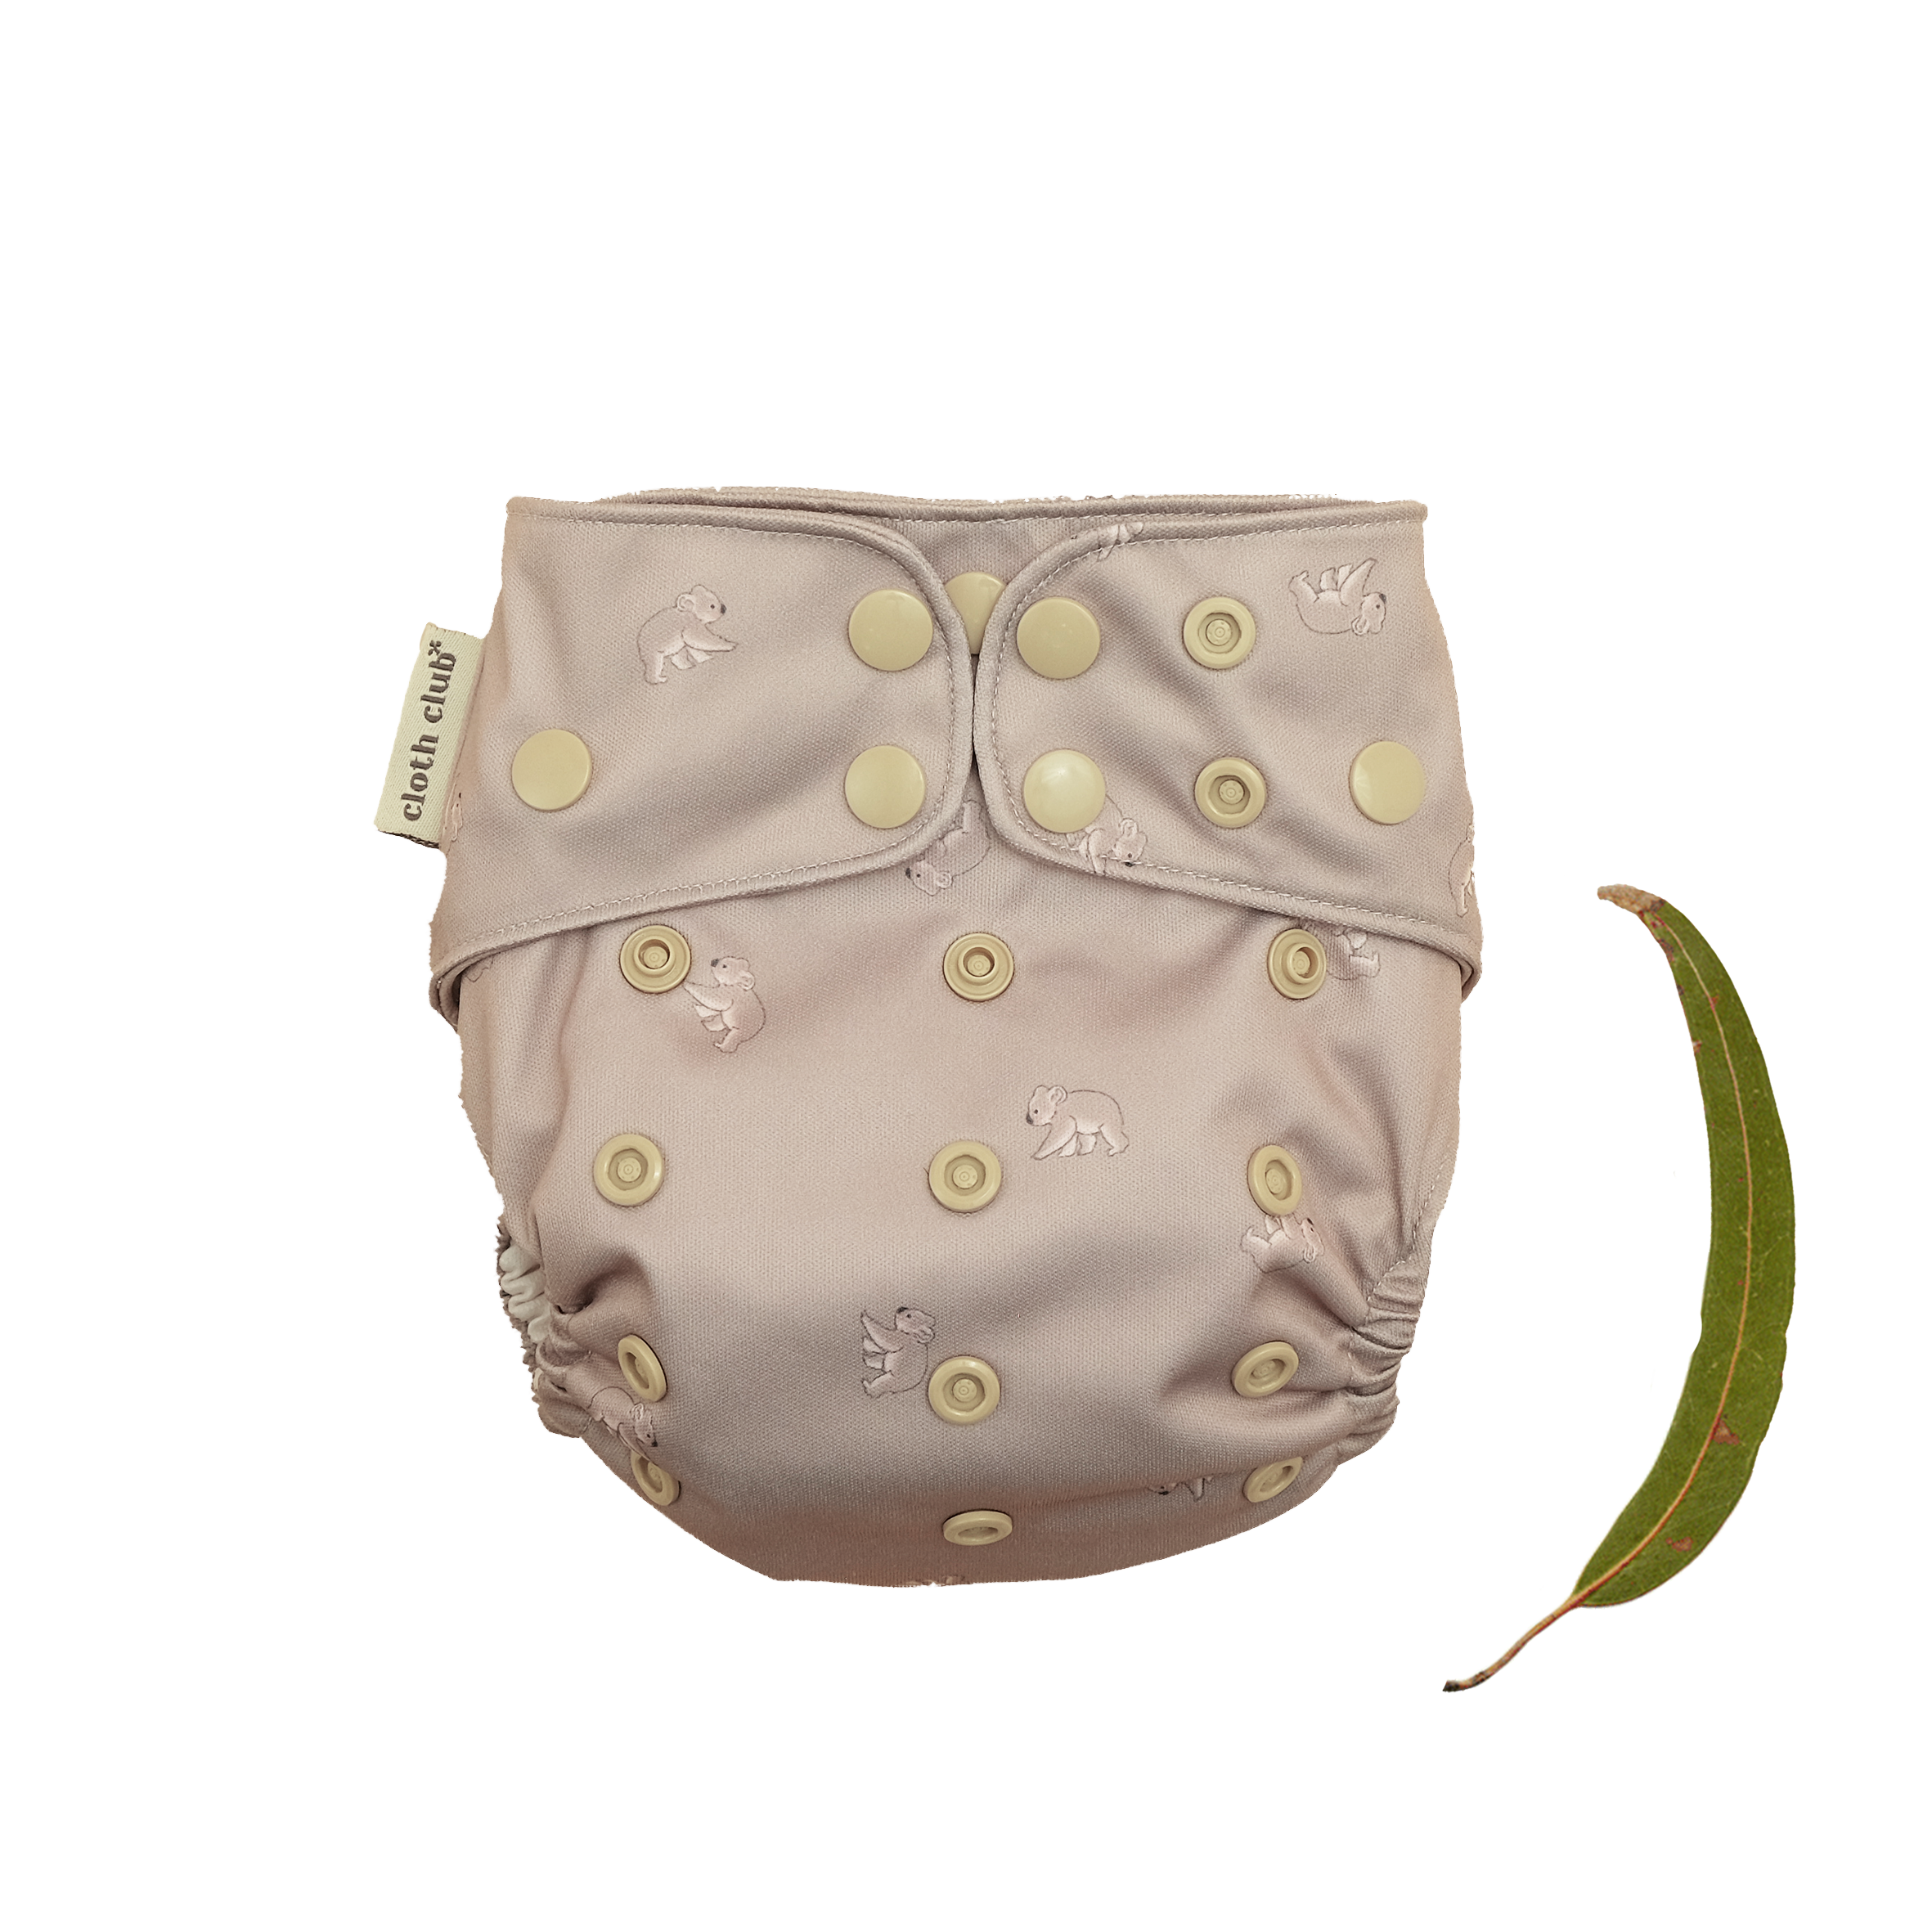 Trial Nappy SAVE 35%